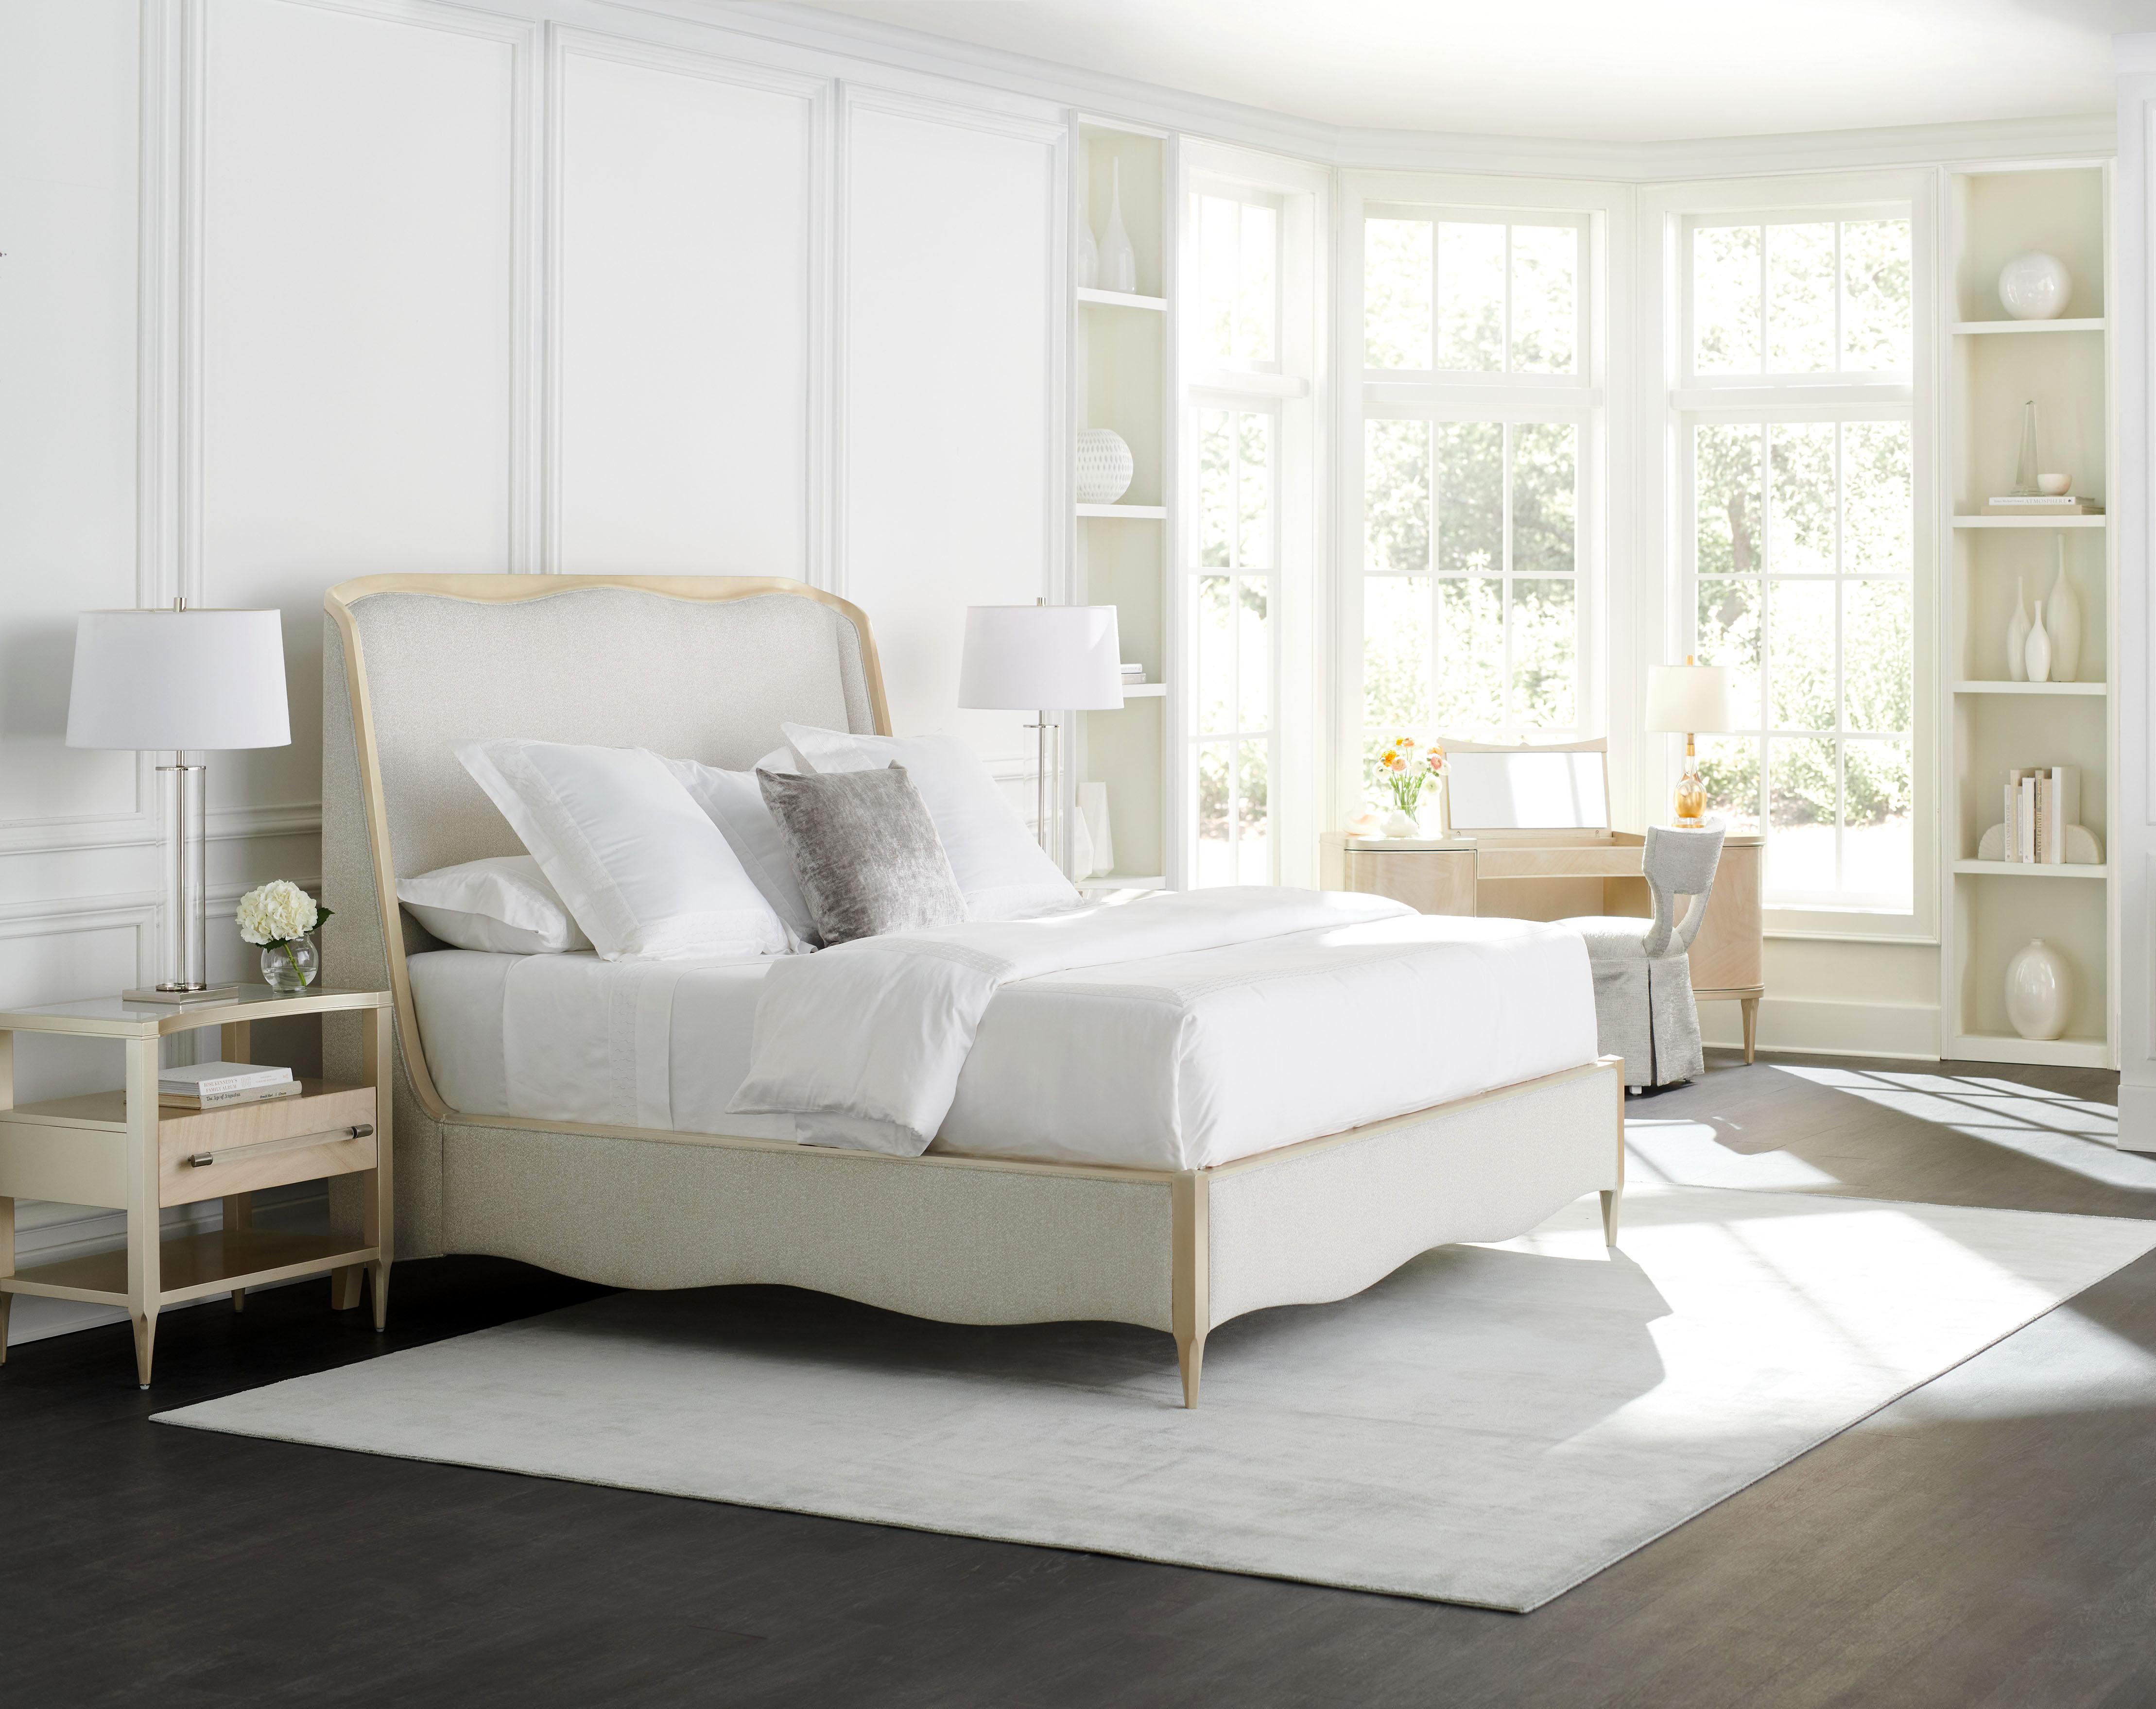 Contemporary Platform Bed Set DEEP SLEEP / CLEARLY OPEN CLA-020-142-Set-3 in Light Gray, Champagne Fabric